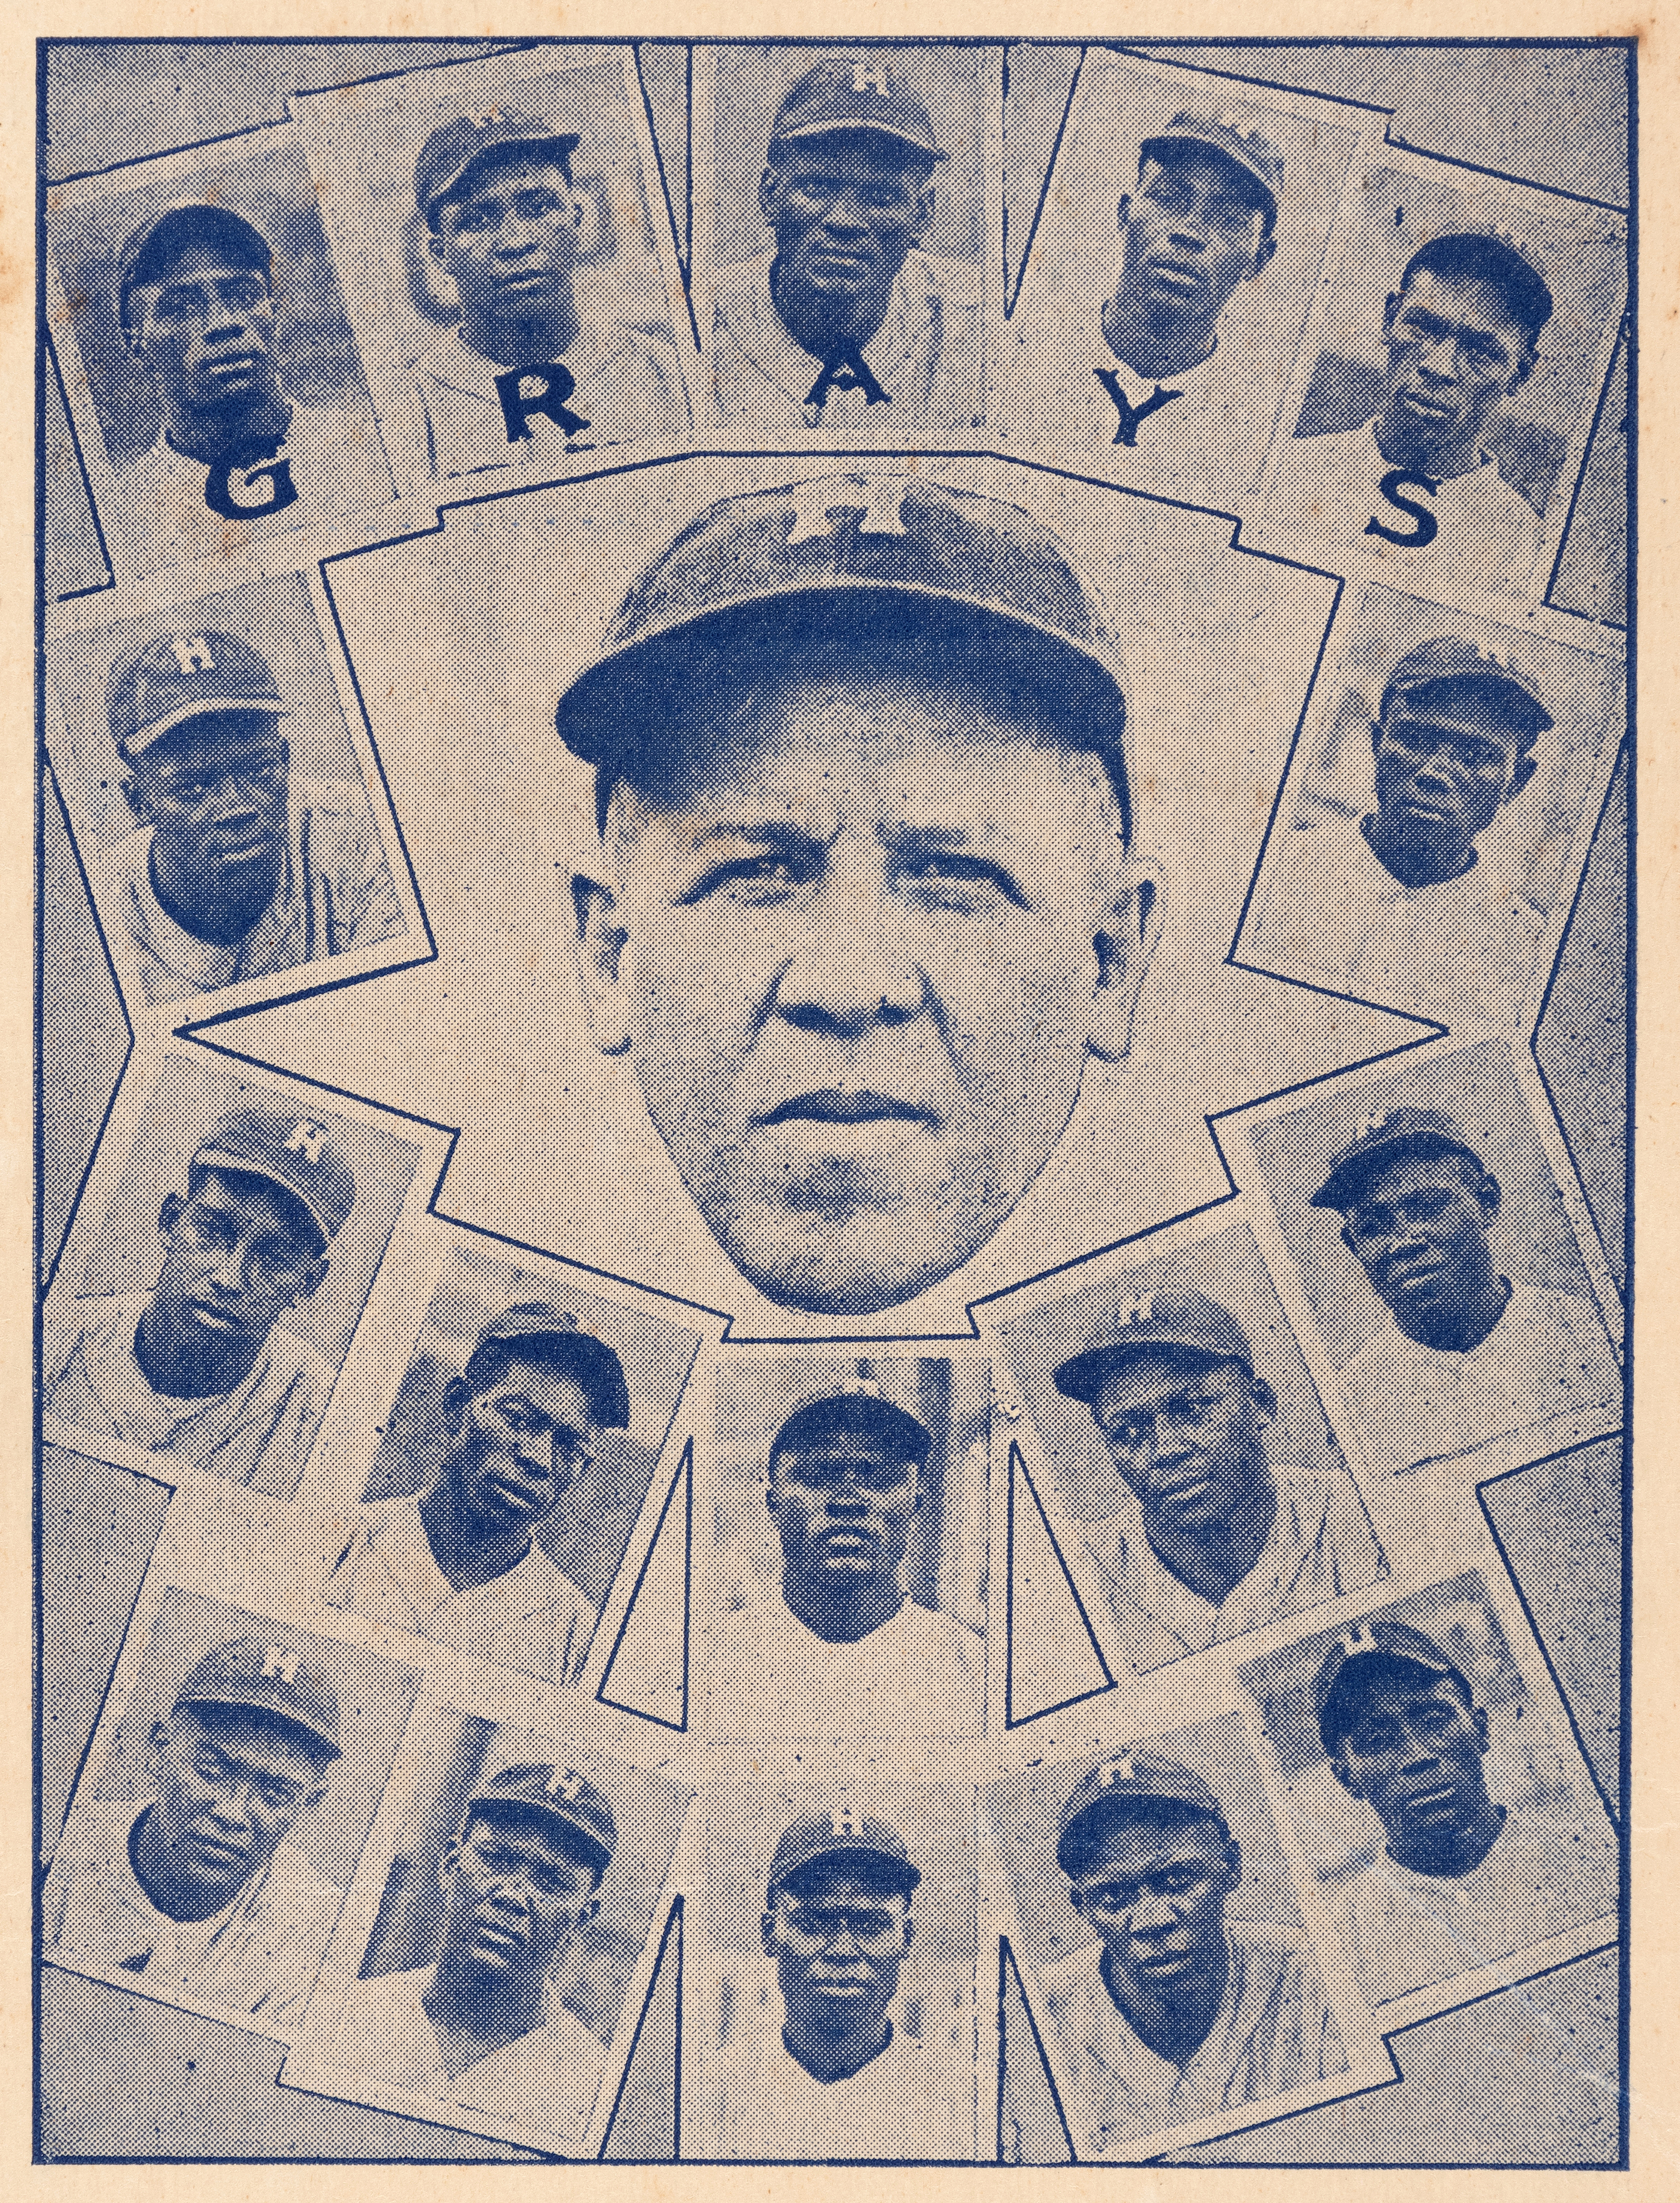 A remarkably crisp and clearly printed 1935 Negro League broadside set a record at Hake's in 2019.